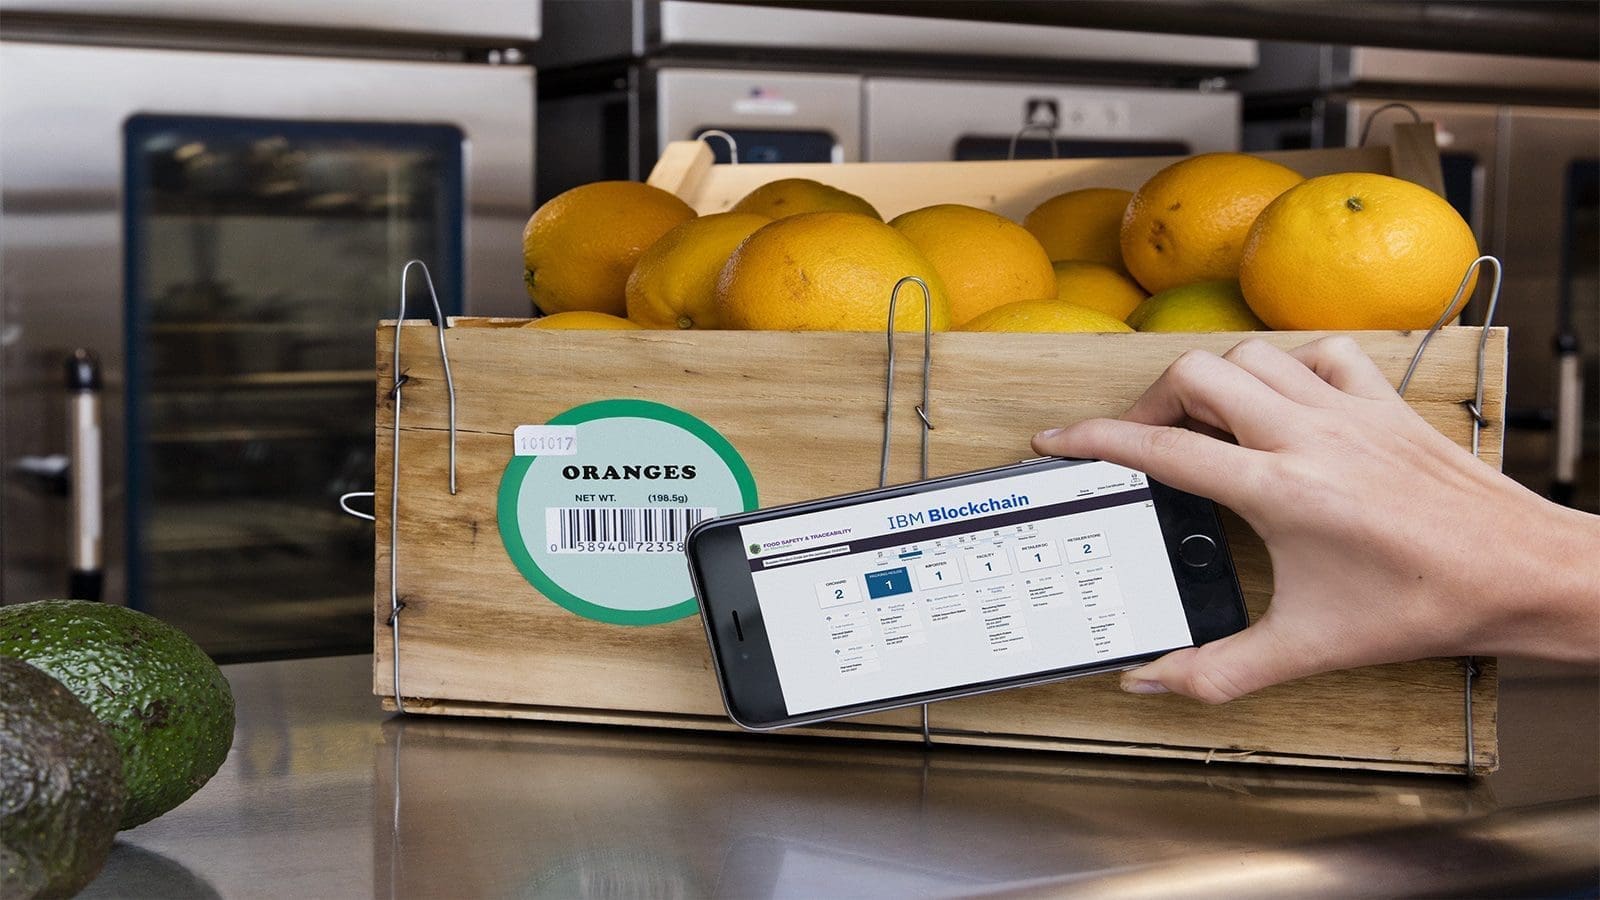 FDA provides clarity on Food Traceability Final Rule with updated FAQs and tools